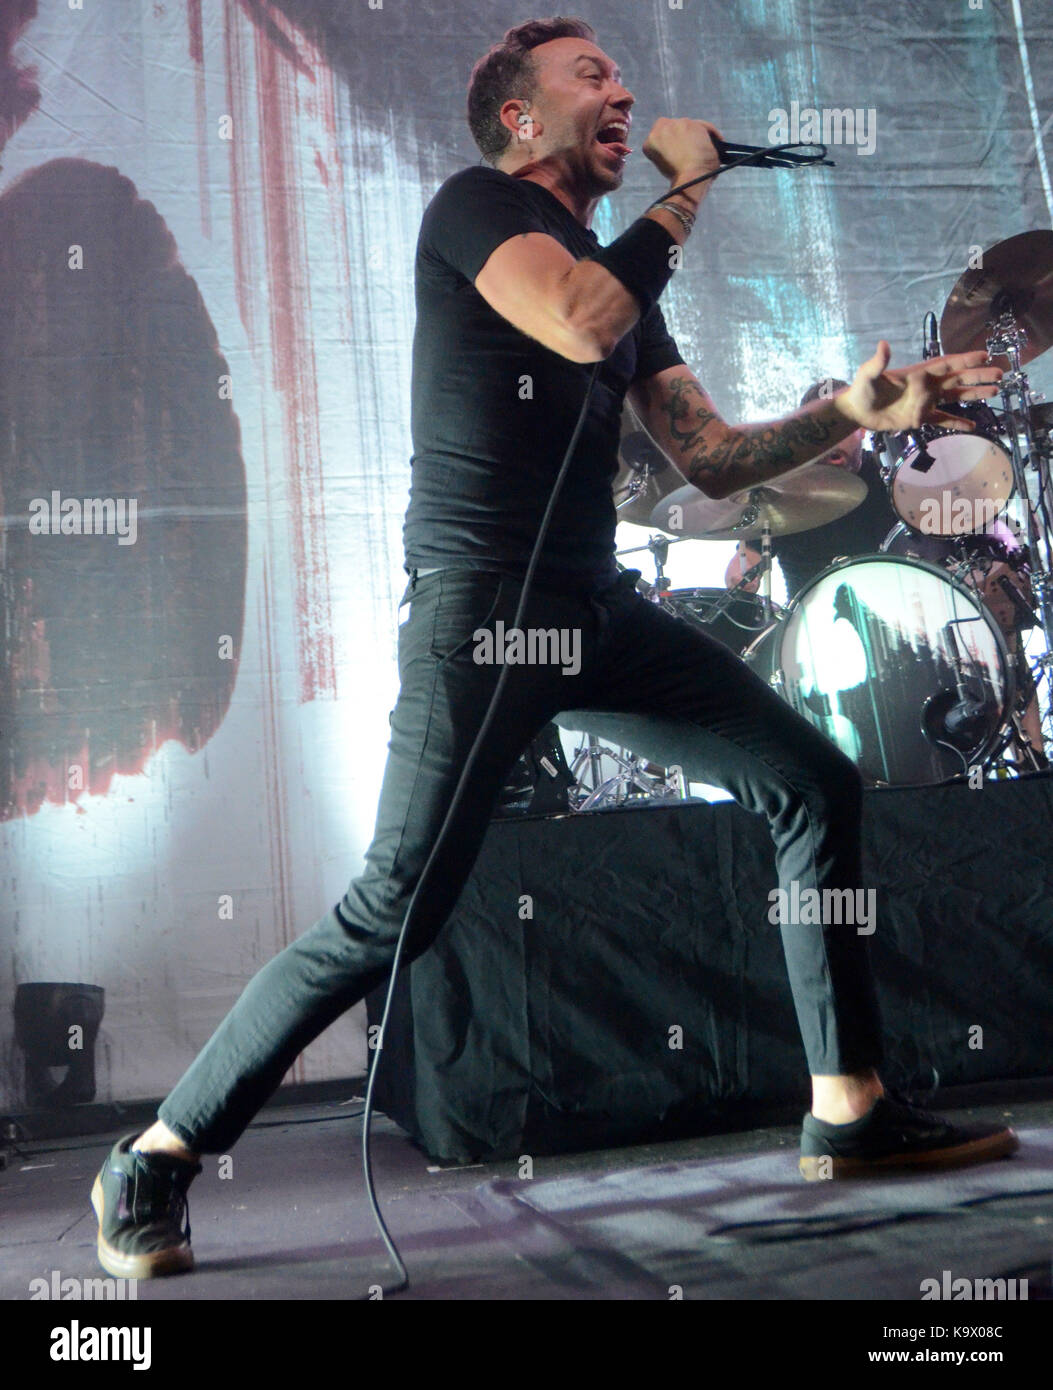 Minneapolis, Minnesota, USA. 23rd Sep, 2017. Lead singer Tim McIlrath of the band Rise Against performs at the Skyway Theatre in Minneapolis, Minnesota. Ricky Bassman/CSM/Alamy Live News Stock Photo